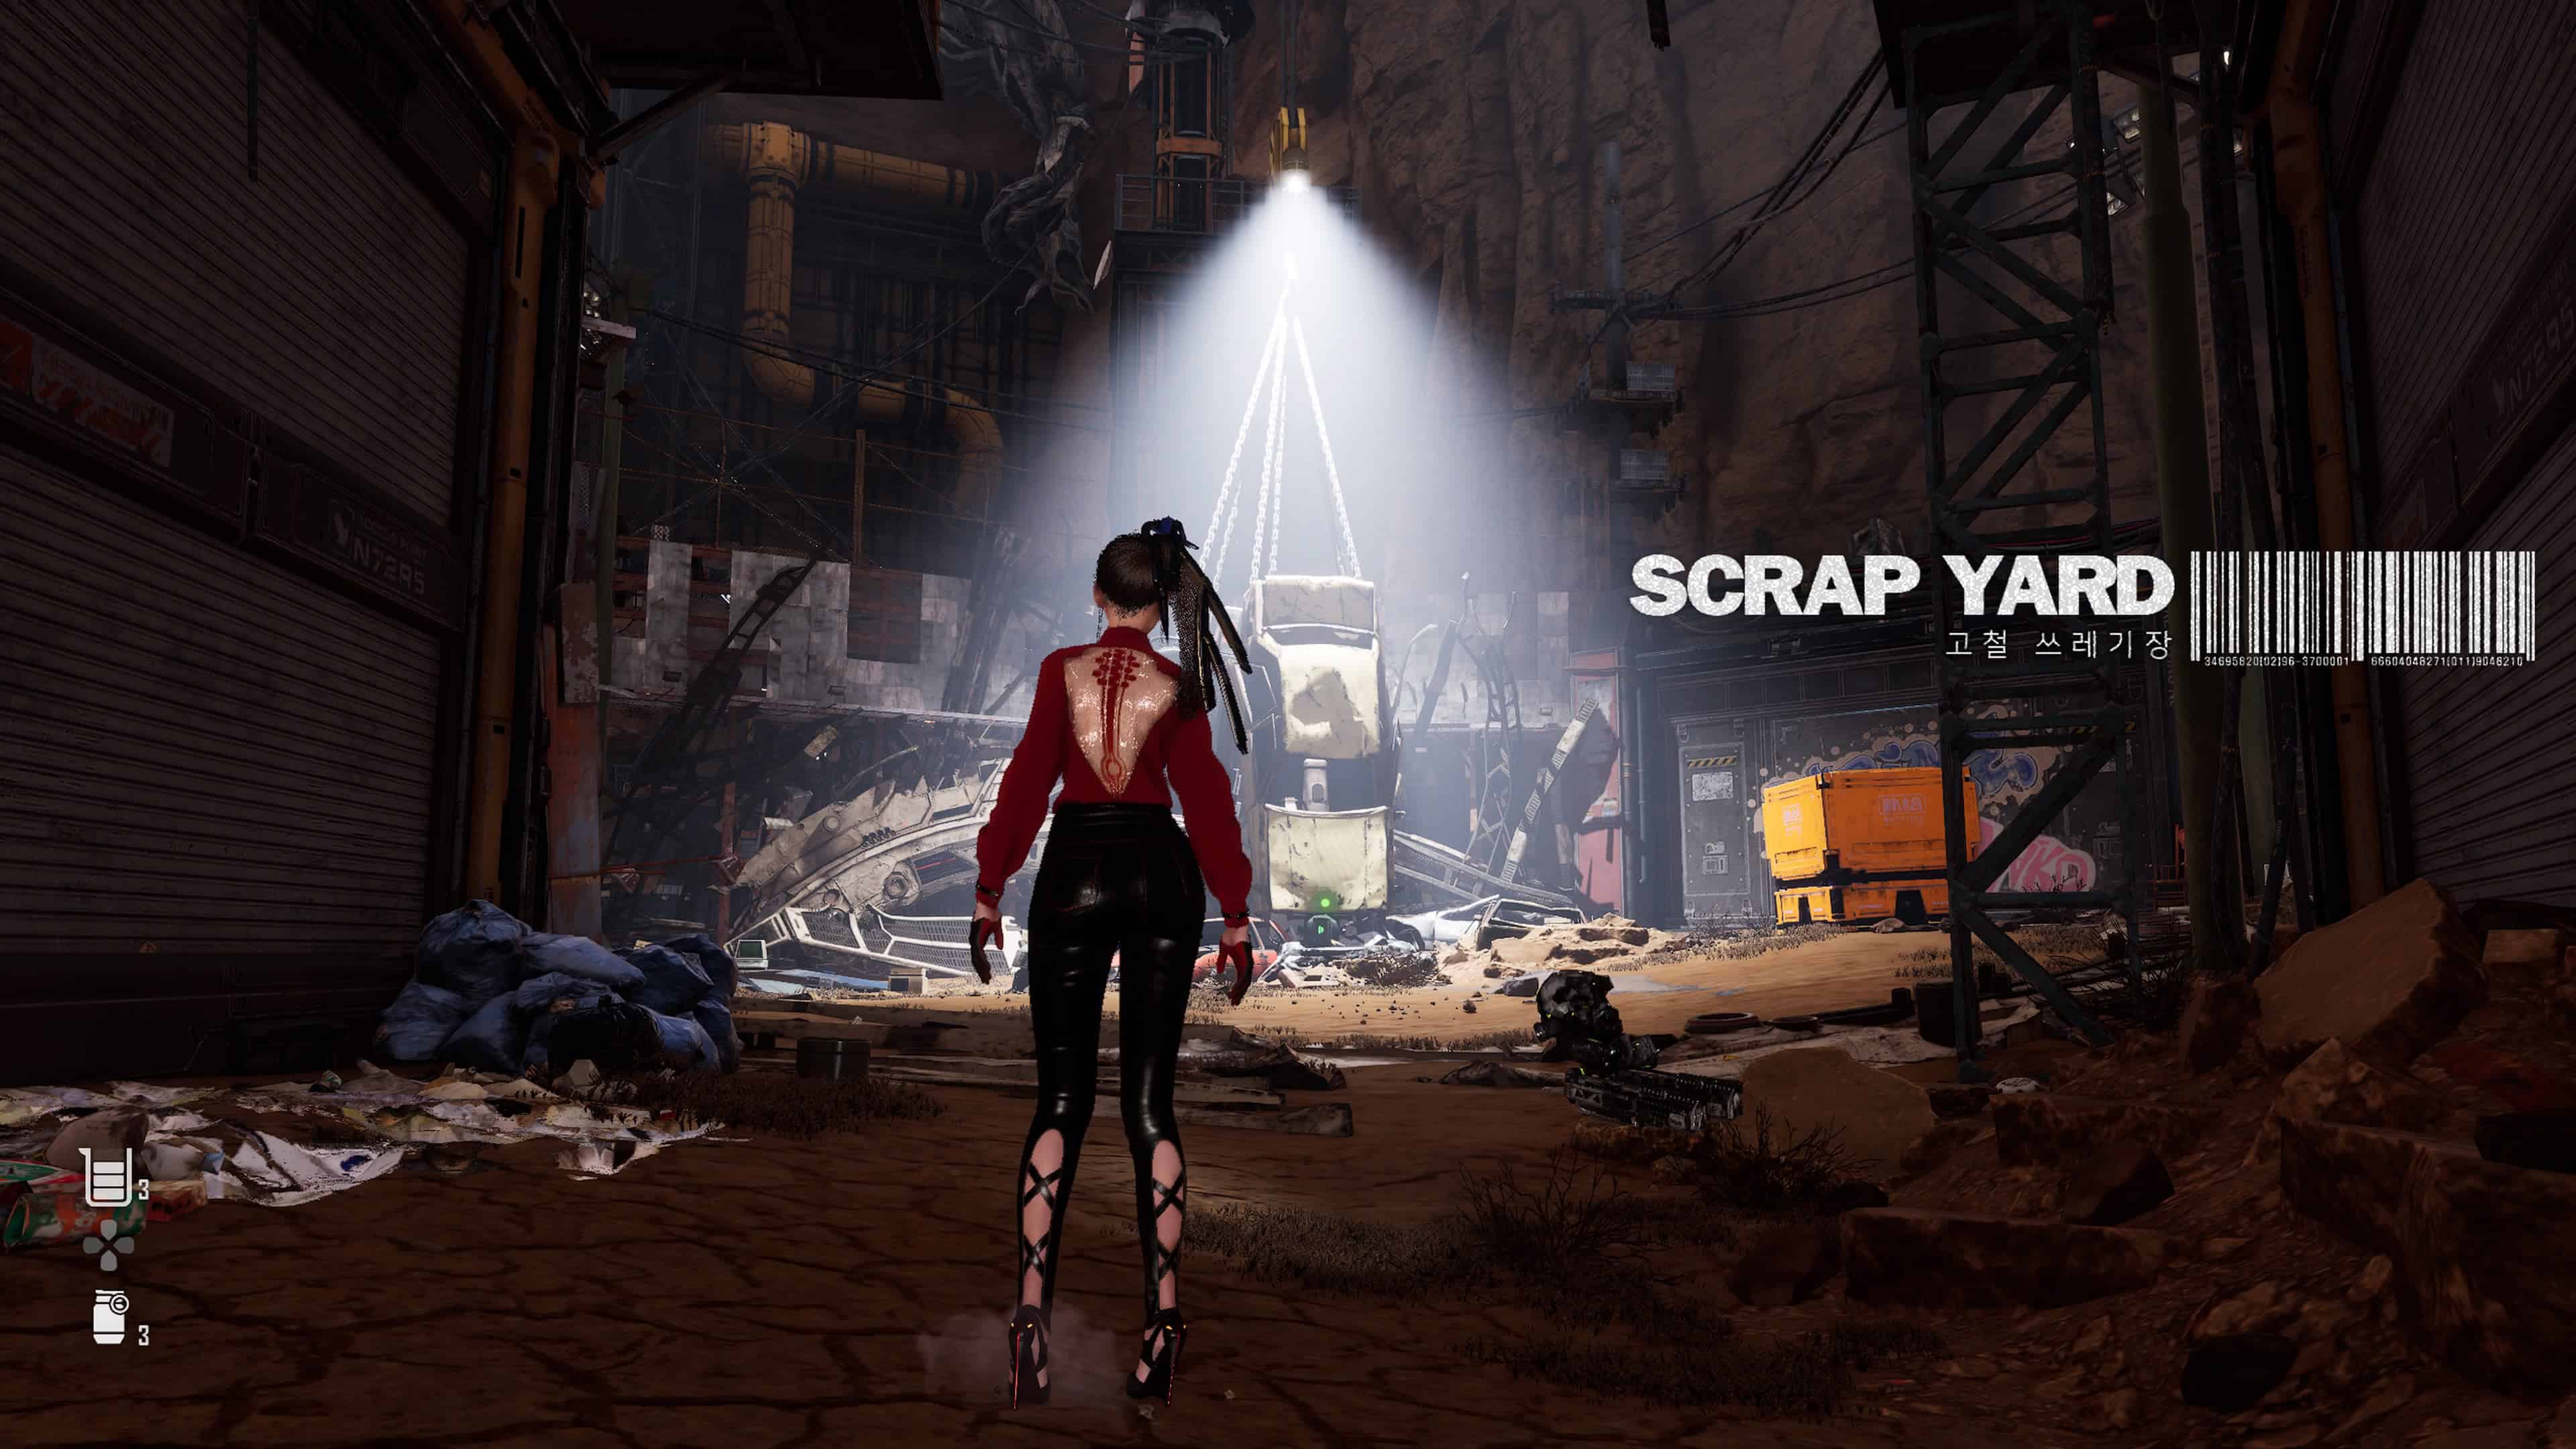 Stellar Blade scrap yard puzzle - EVE enters the scrap yard area and sees a light shining in front.